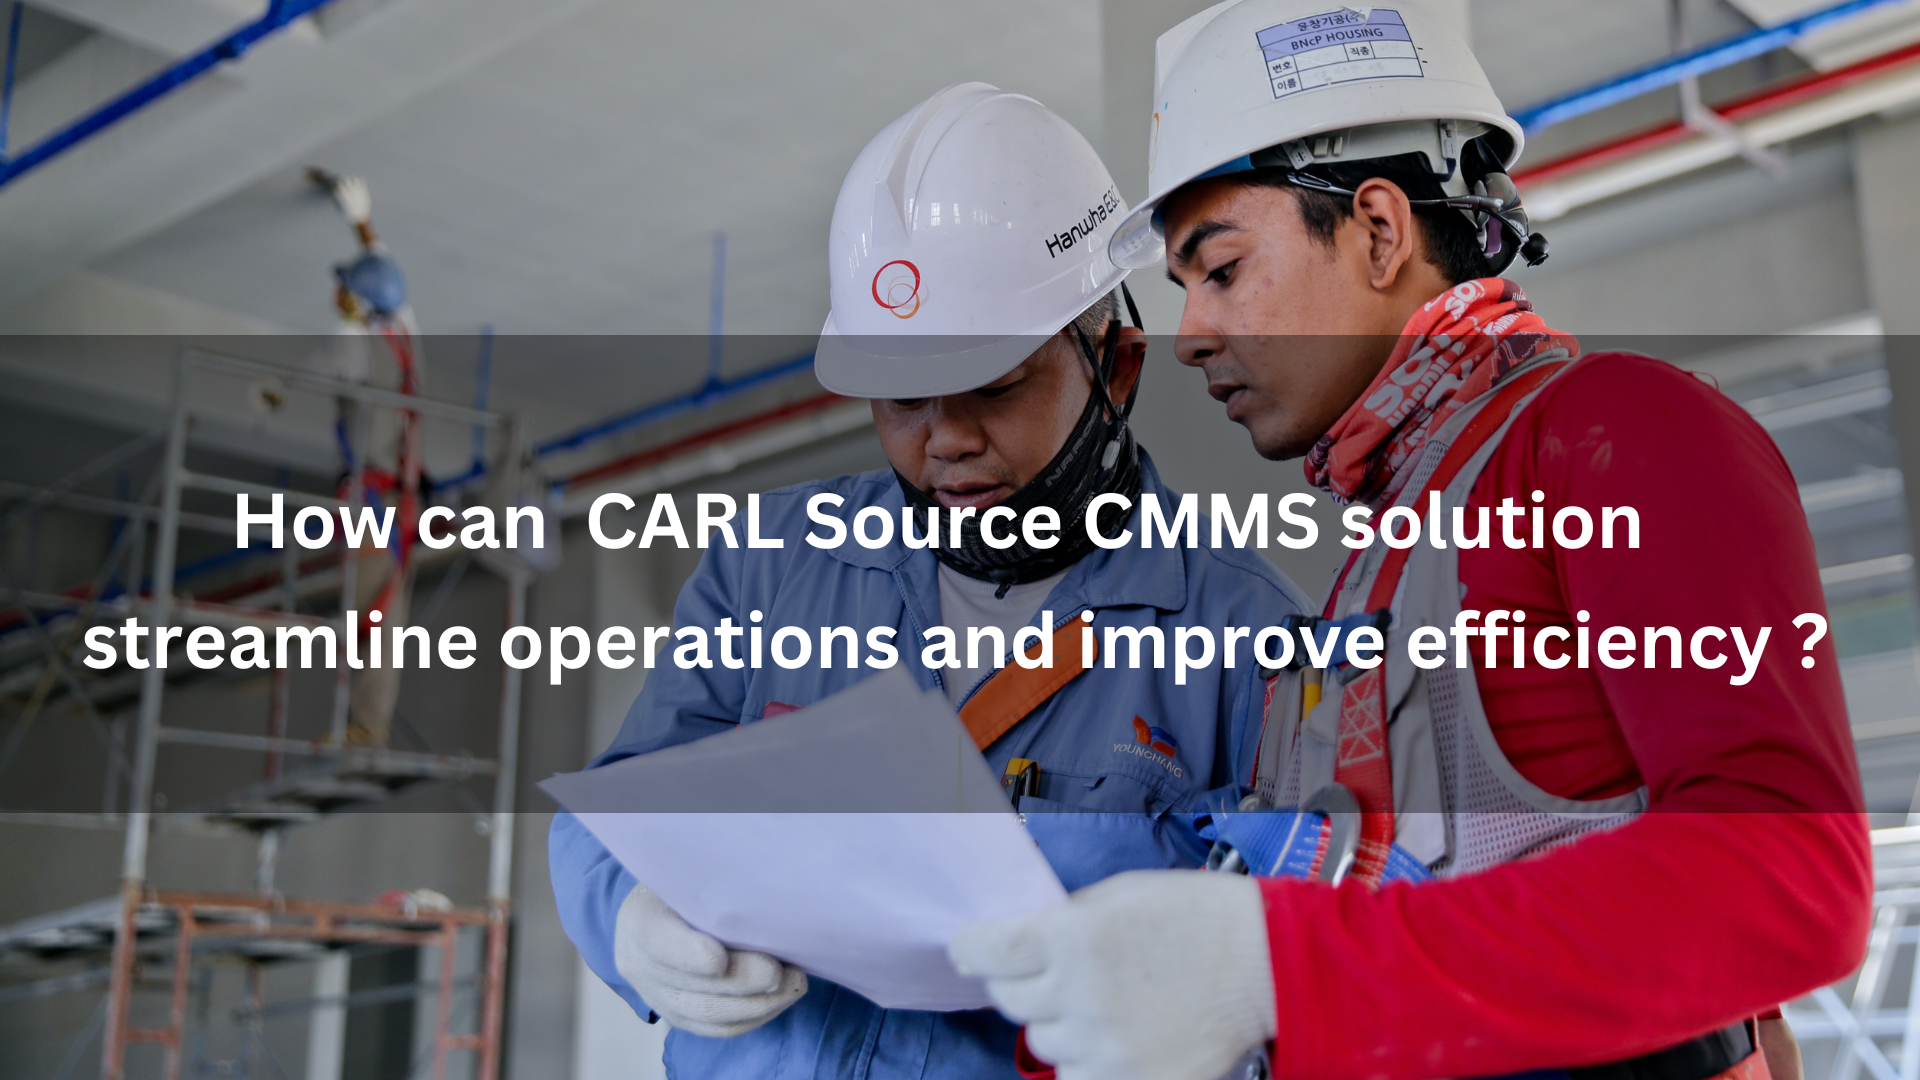 CARL Source solution CMMS